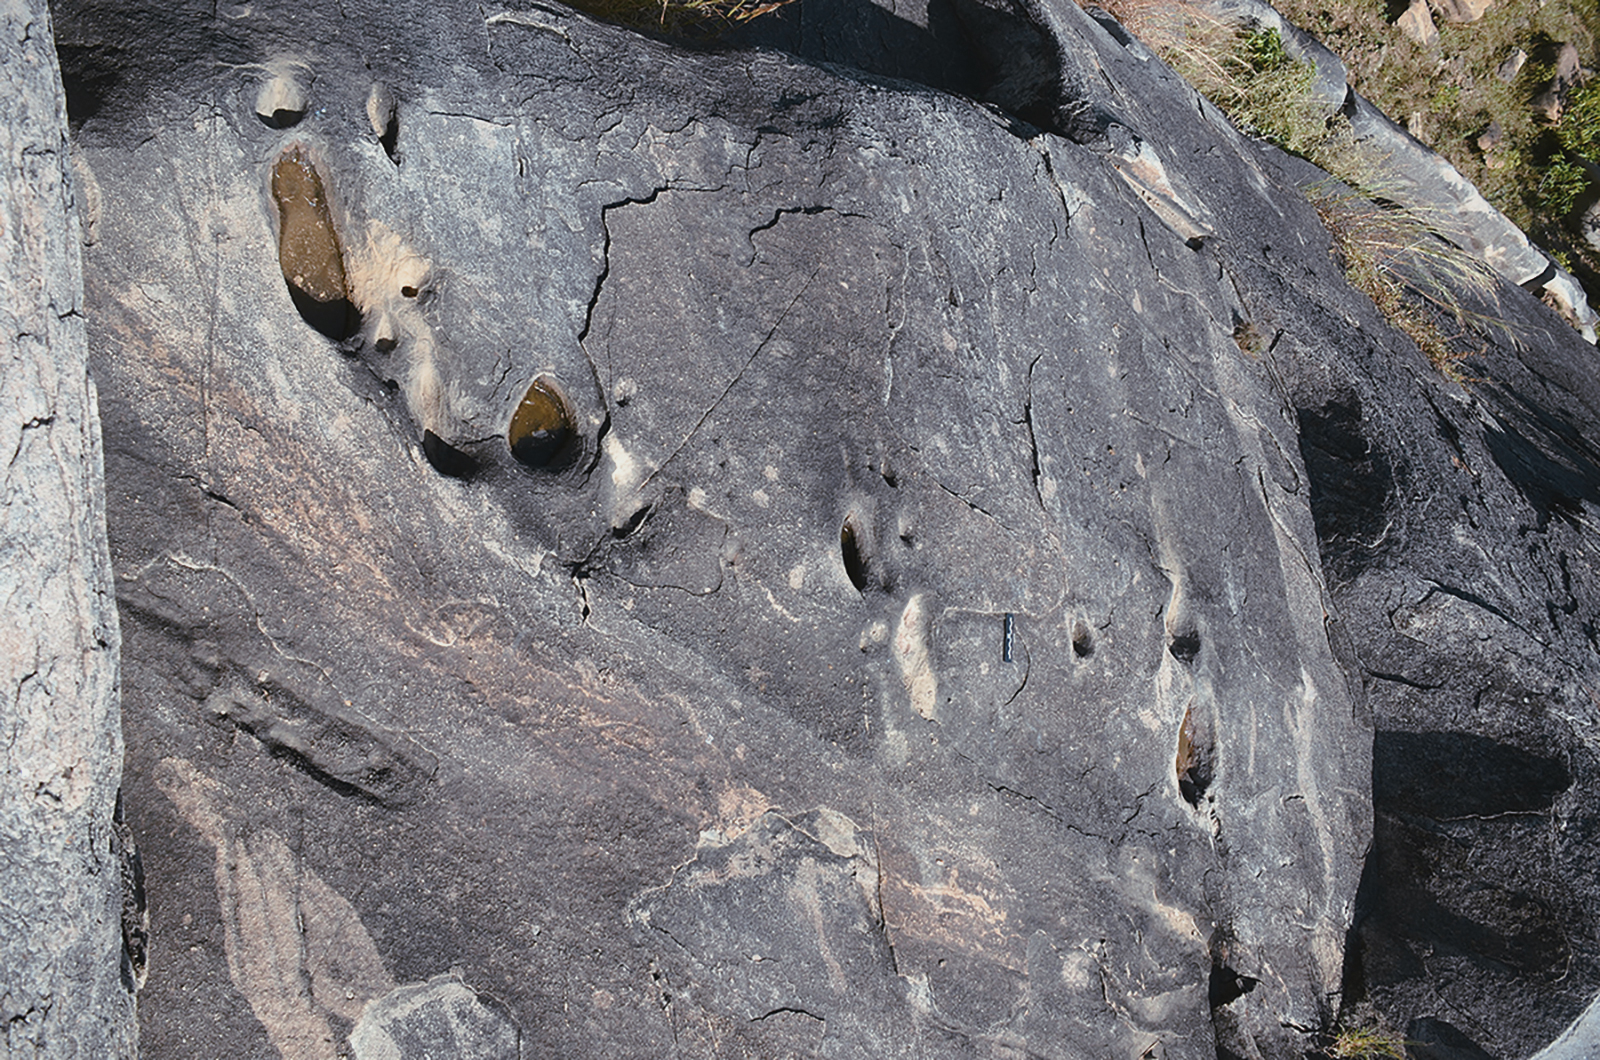 A single big flat sloping rock facing north east, approximately 8 by 9 feet, has 36 vulvas in various sizes